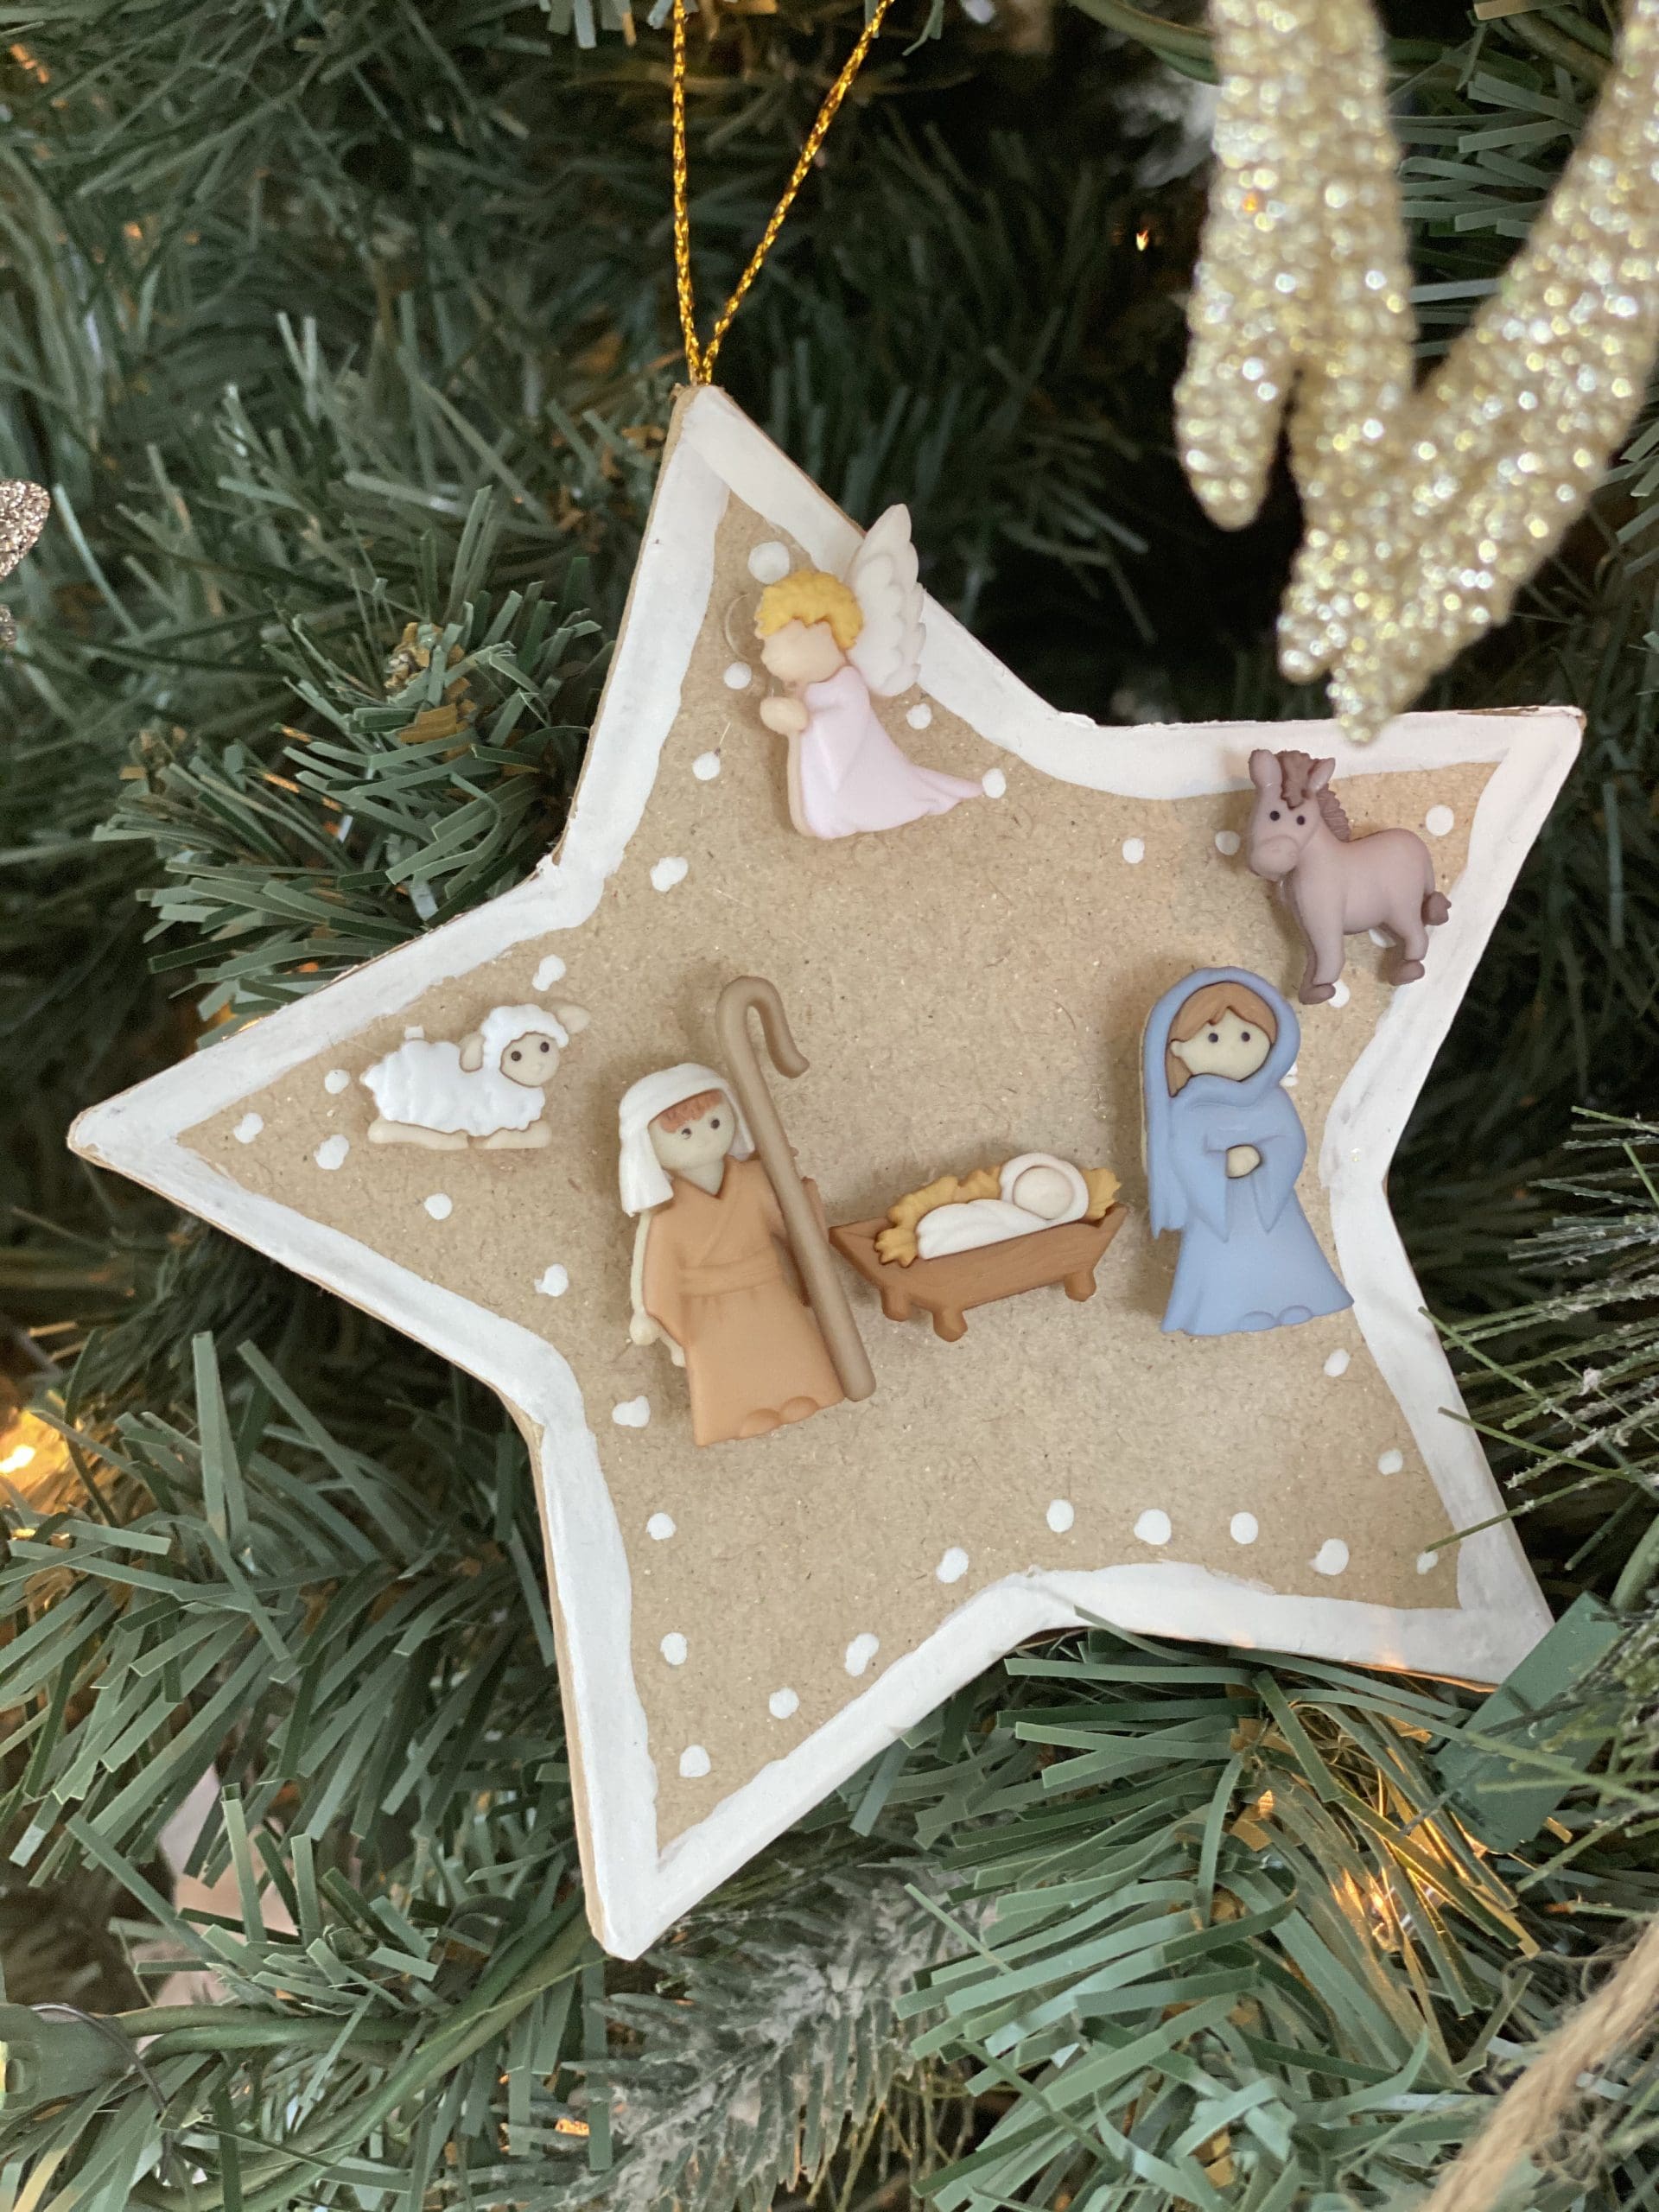 4 Simple Crafts to Do With Kids This Season